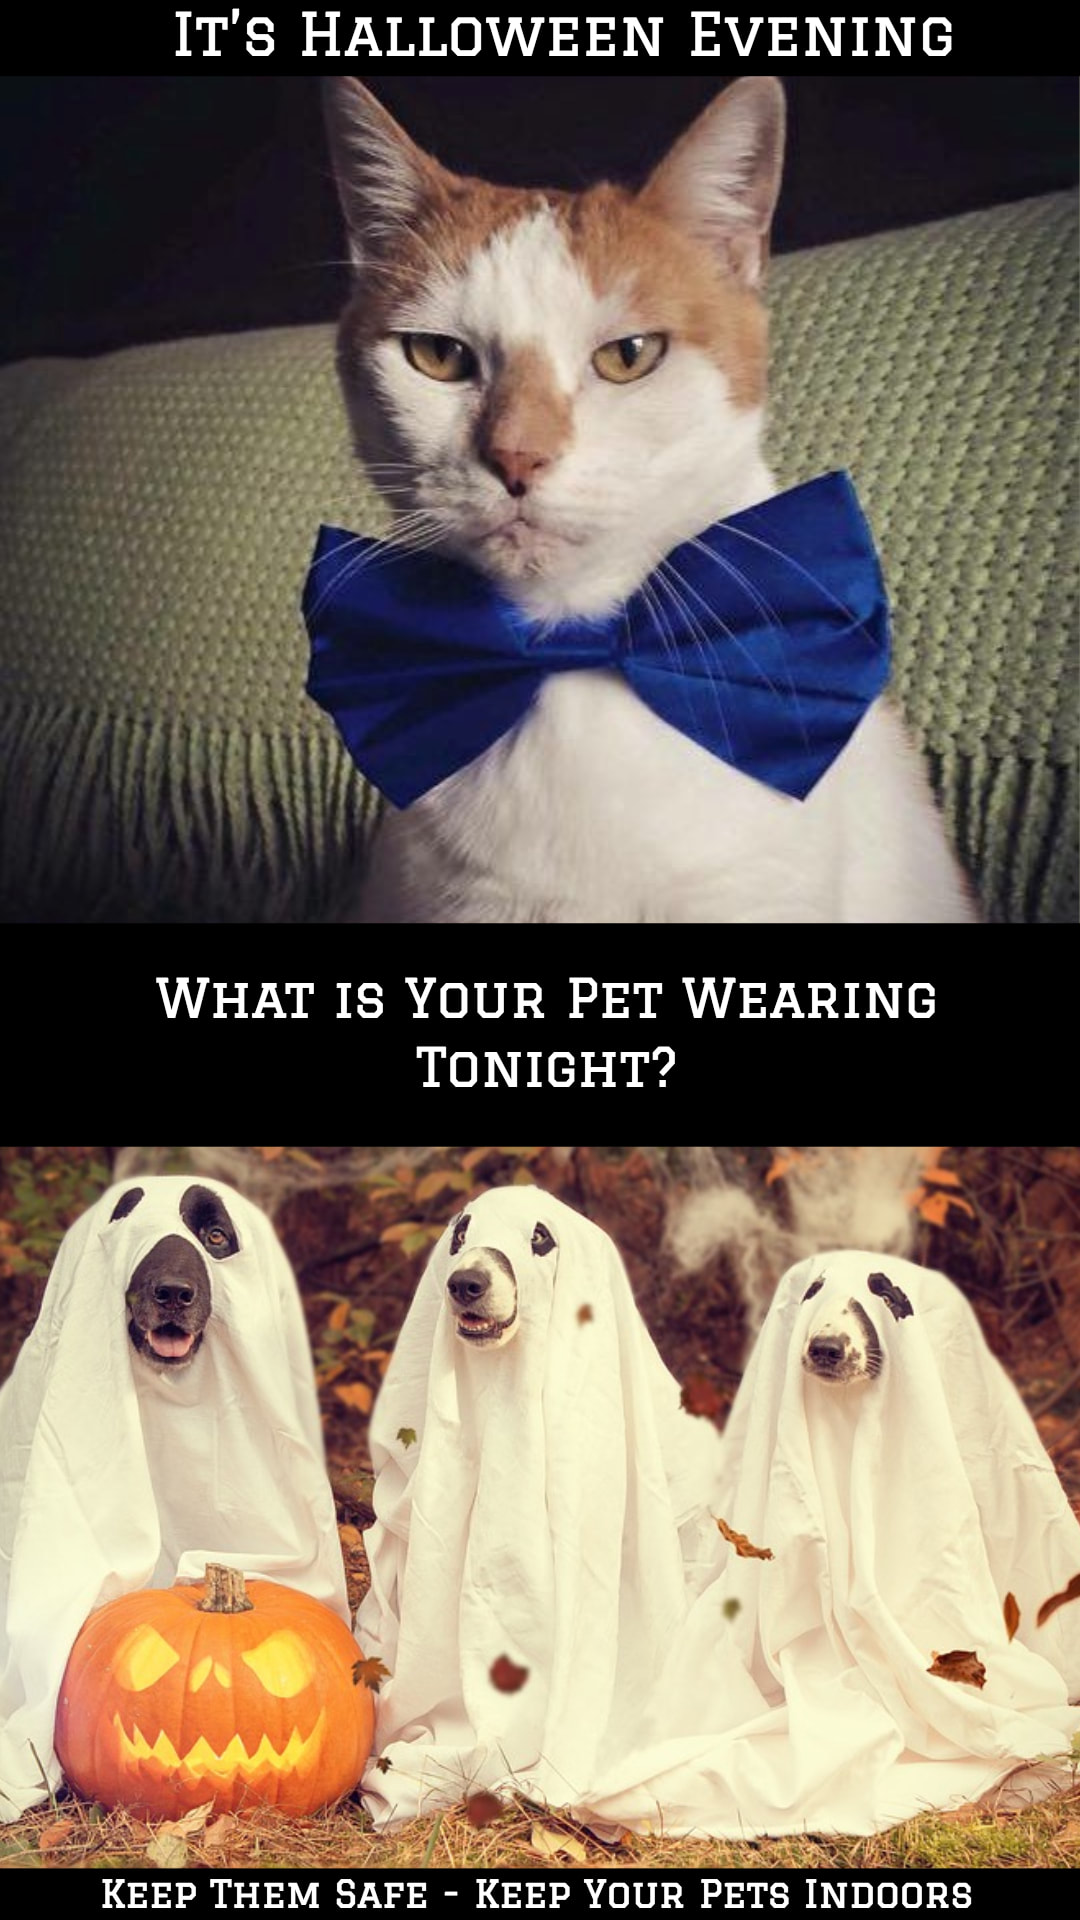 Halloween for pets: There are costumes they will wear and those they won't. 